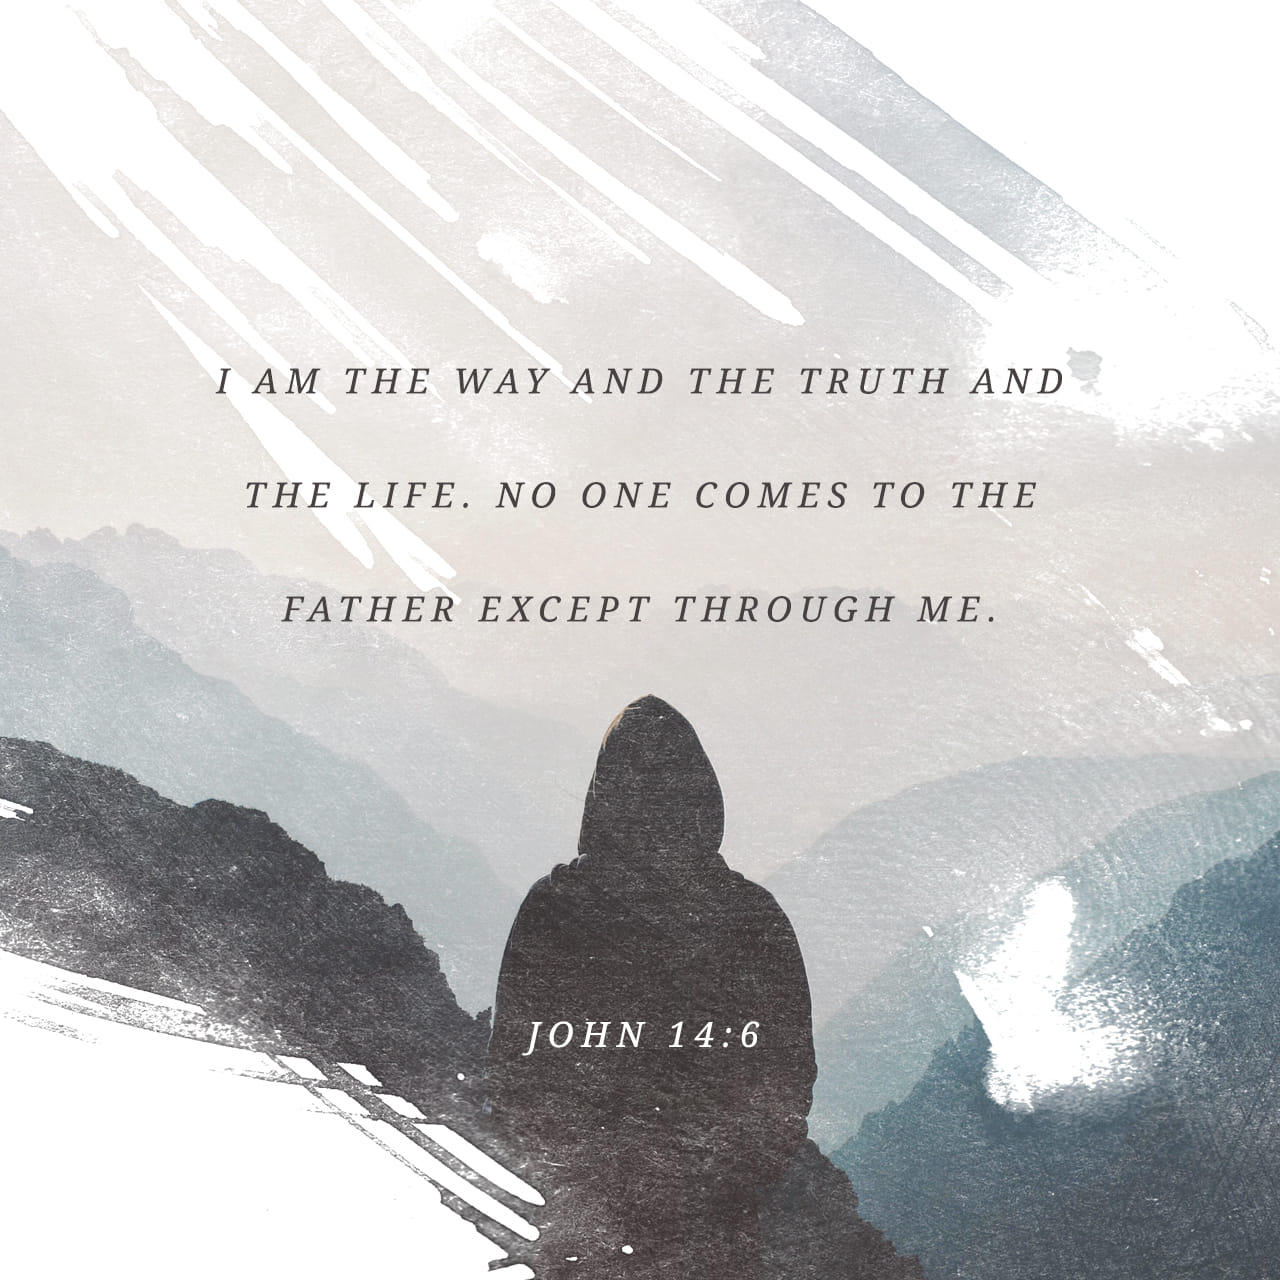 Jesus answered, “I am the way and the truth and the life. No one comes to the Father except through me. John 14:6 NIV https://john.bible/john-14-6